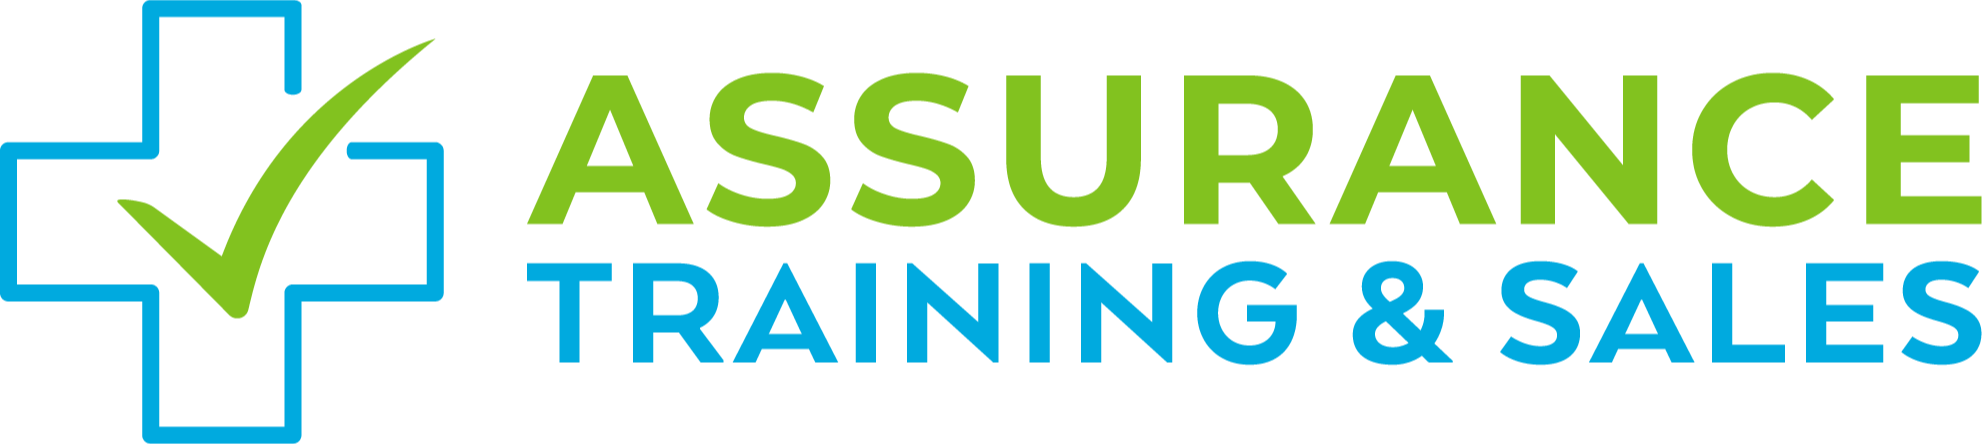 Assurance Training & Sales -Workplace first aid training, work place first aid kits